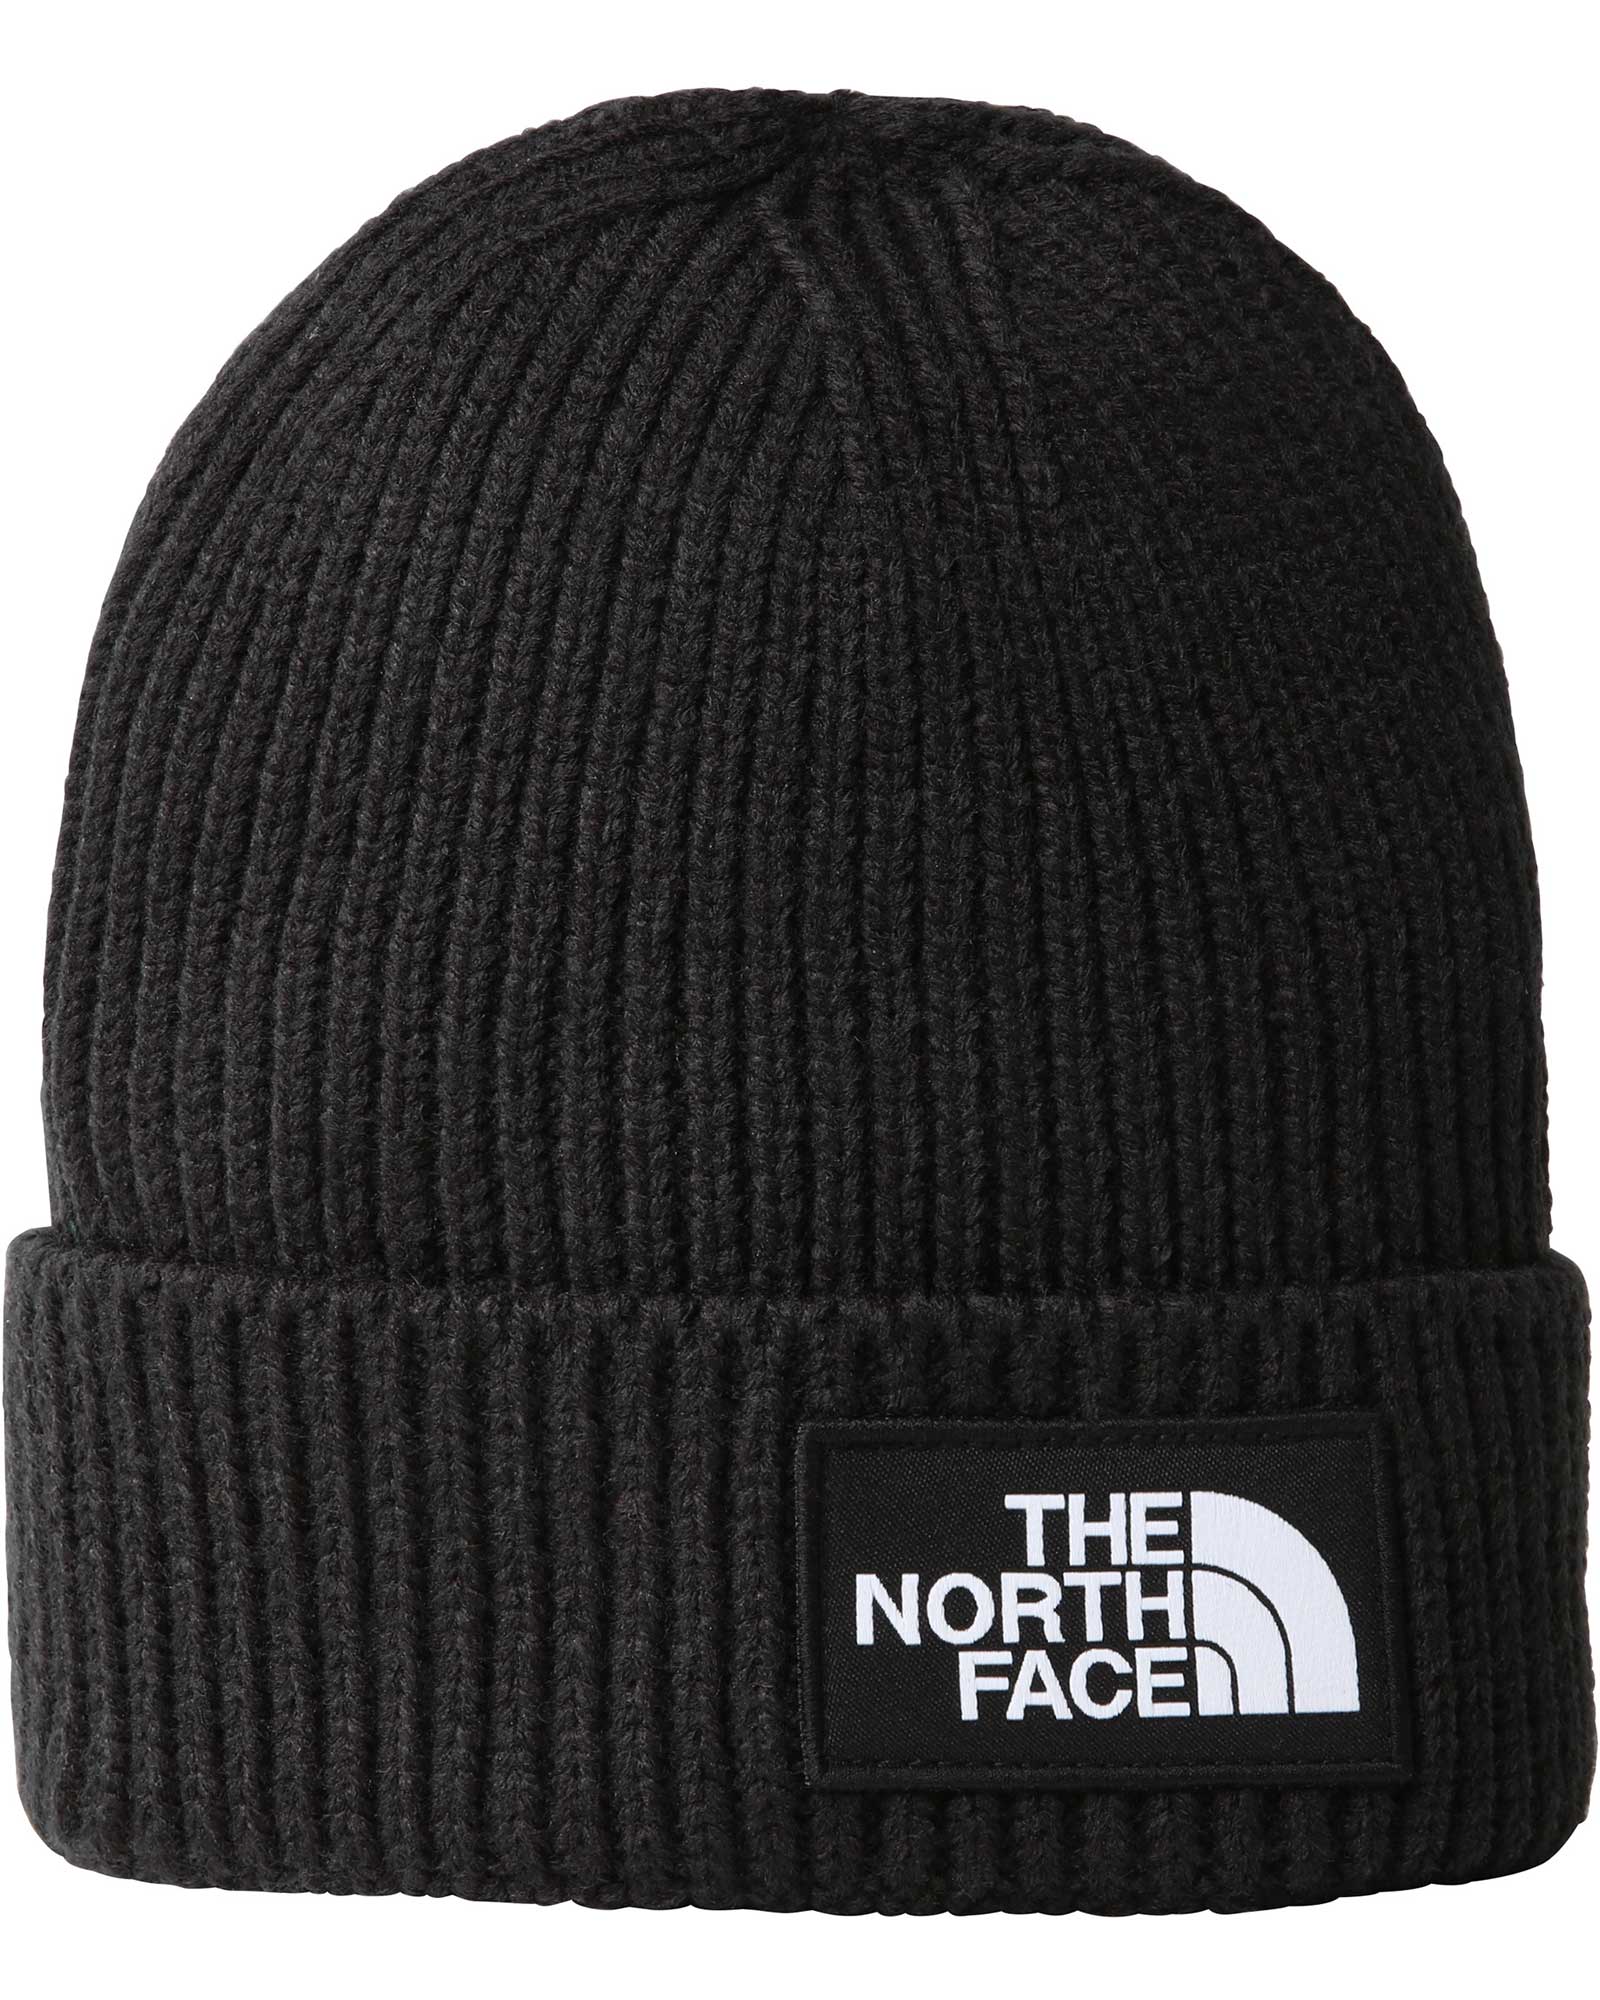 Product image of The North Face TNF Box Logo Cuffed Kids' Beanie